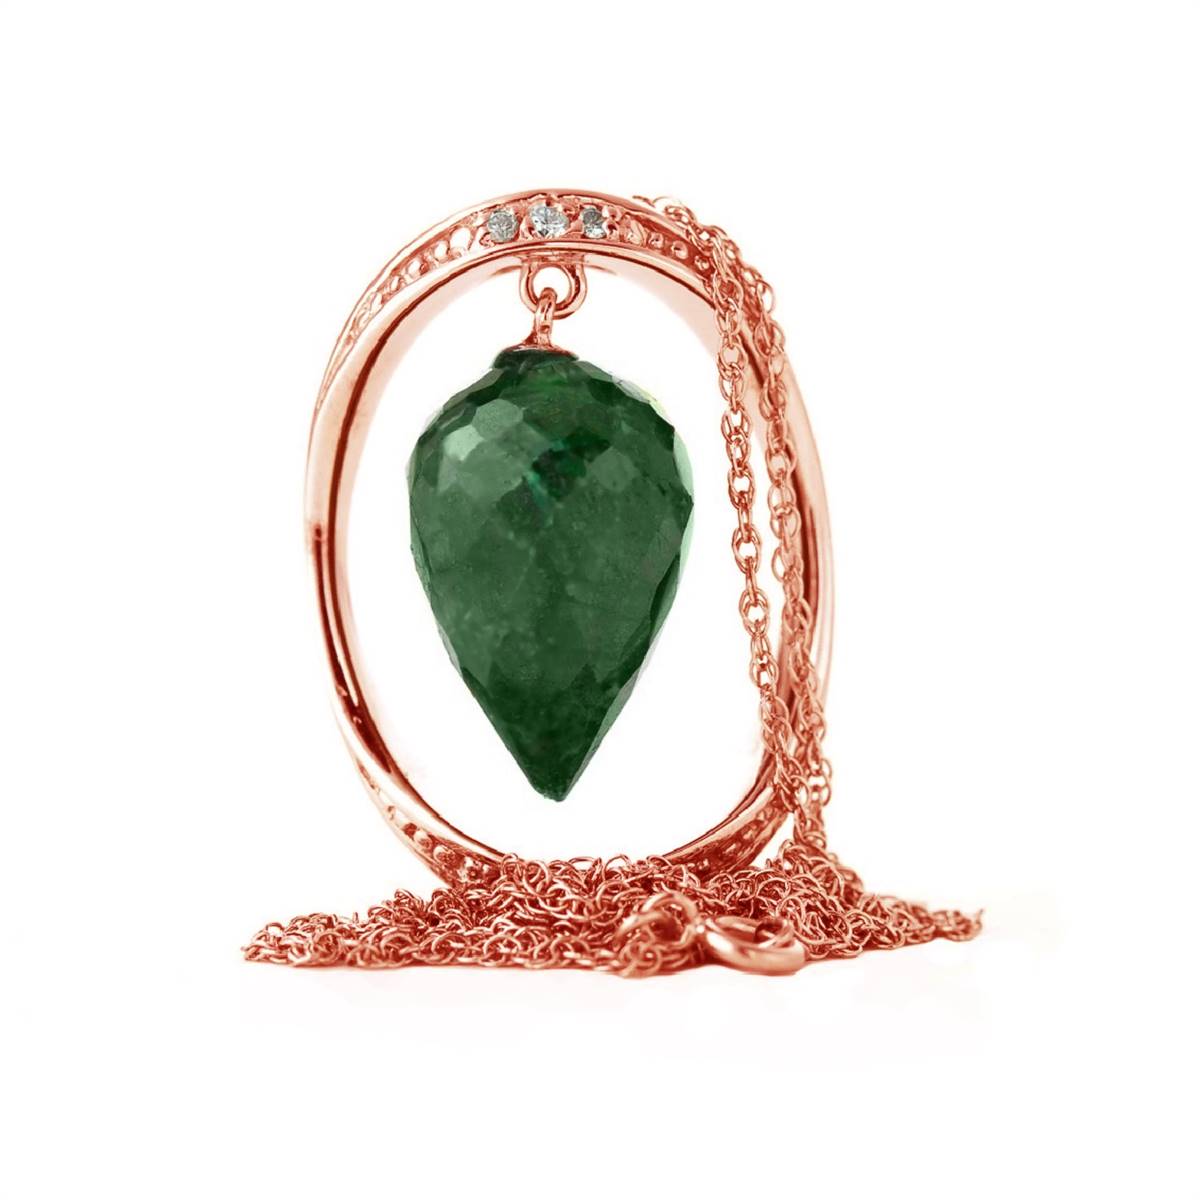 14K Solid Rose Gold Necklace w/ Diamonds & Briolette Pointy Drop Dyed Green Sapphire